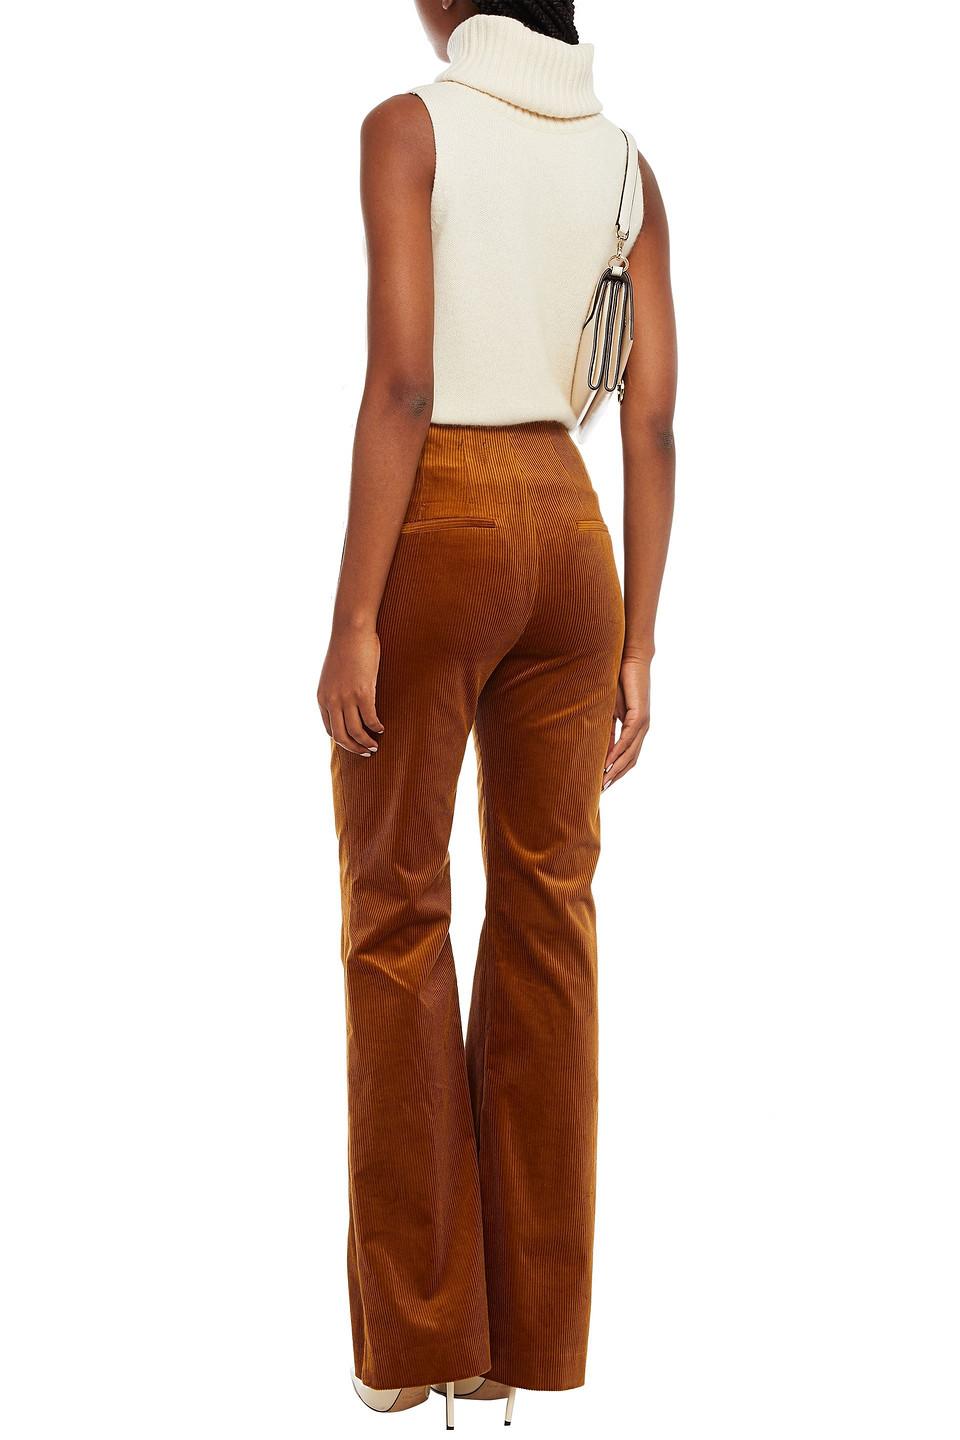 Veronica Cotton-blend Corduroy Flared Pants, Vertical-stripes Pattern in Light Brown (Brown) - Lyst